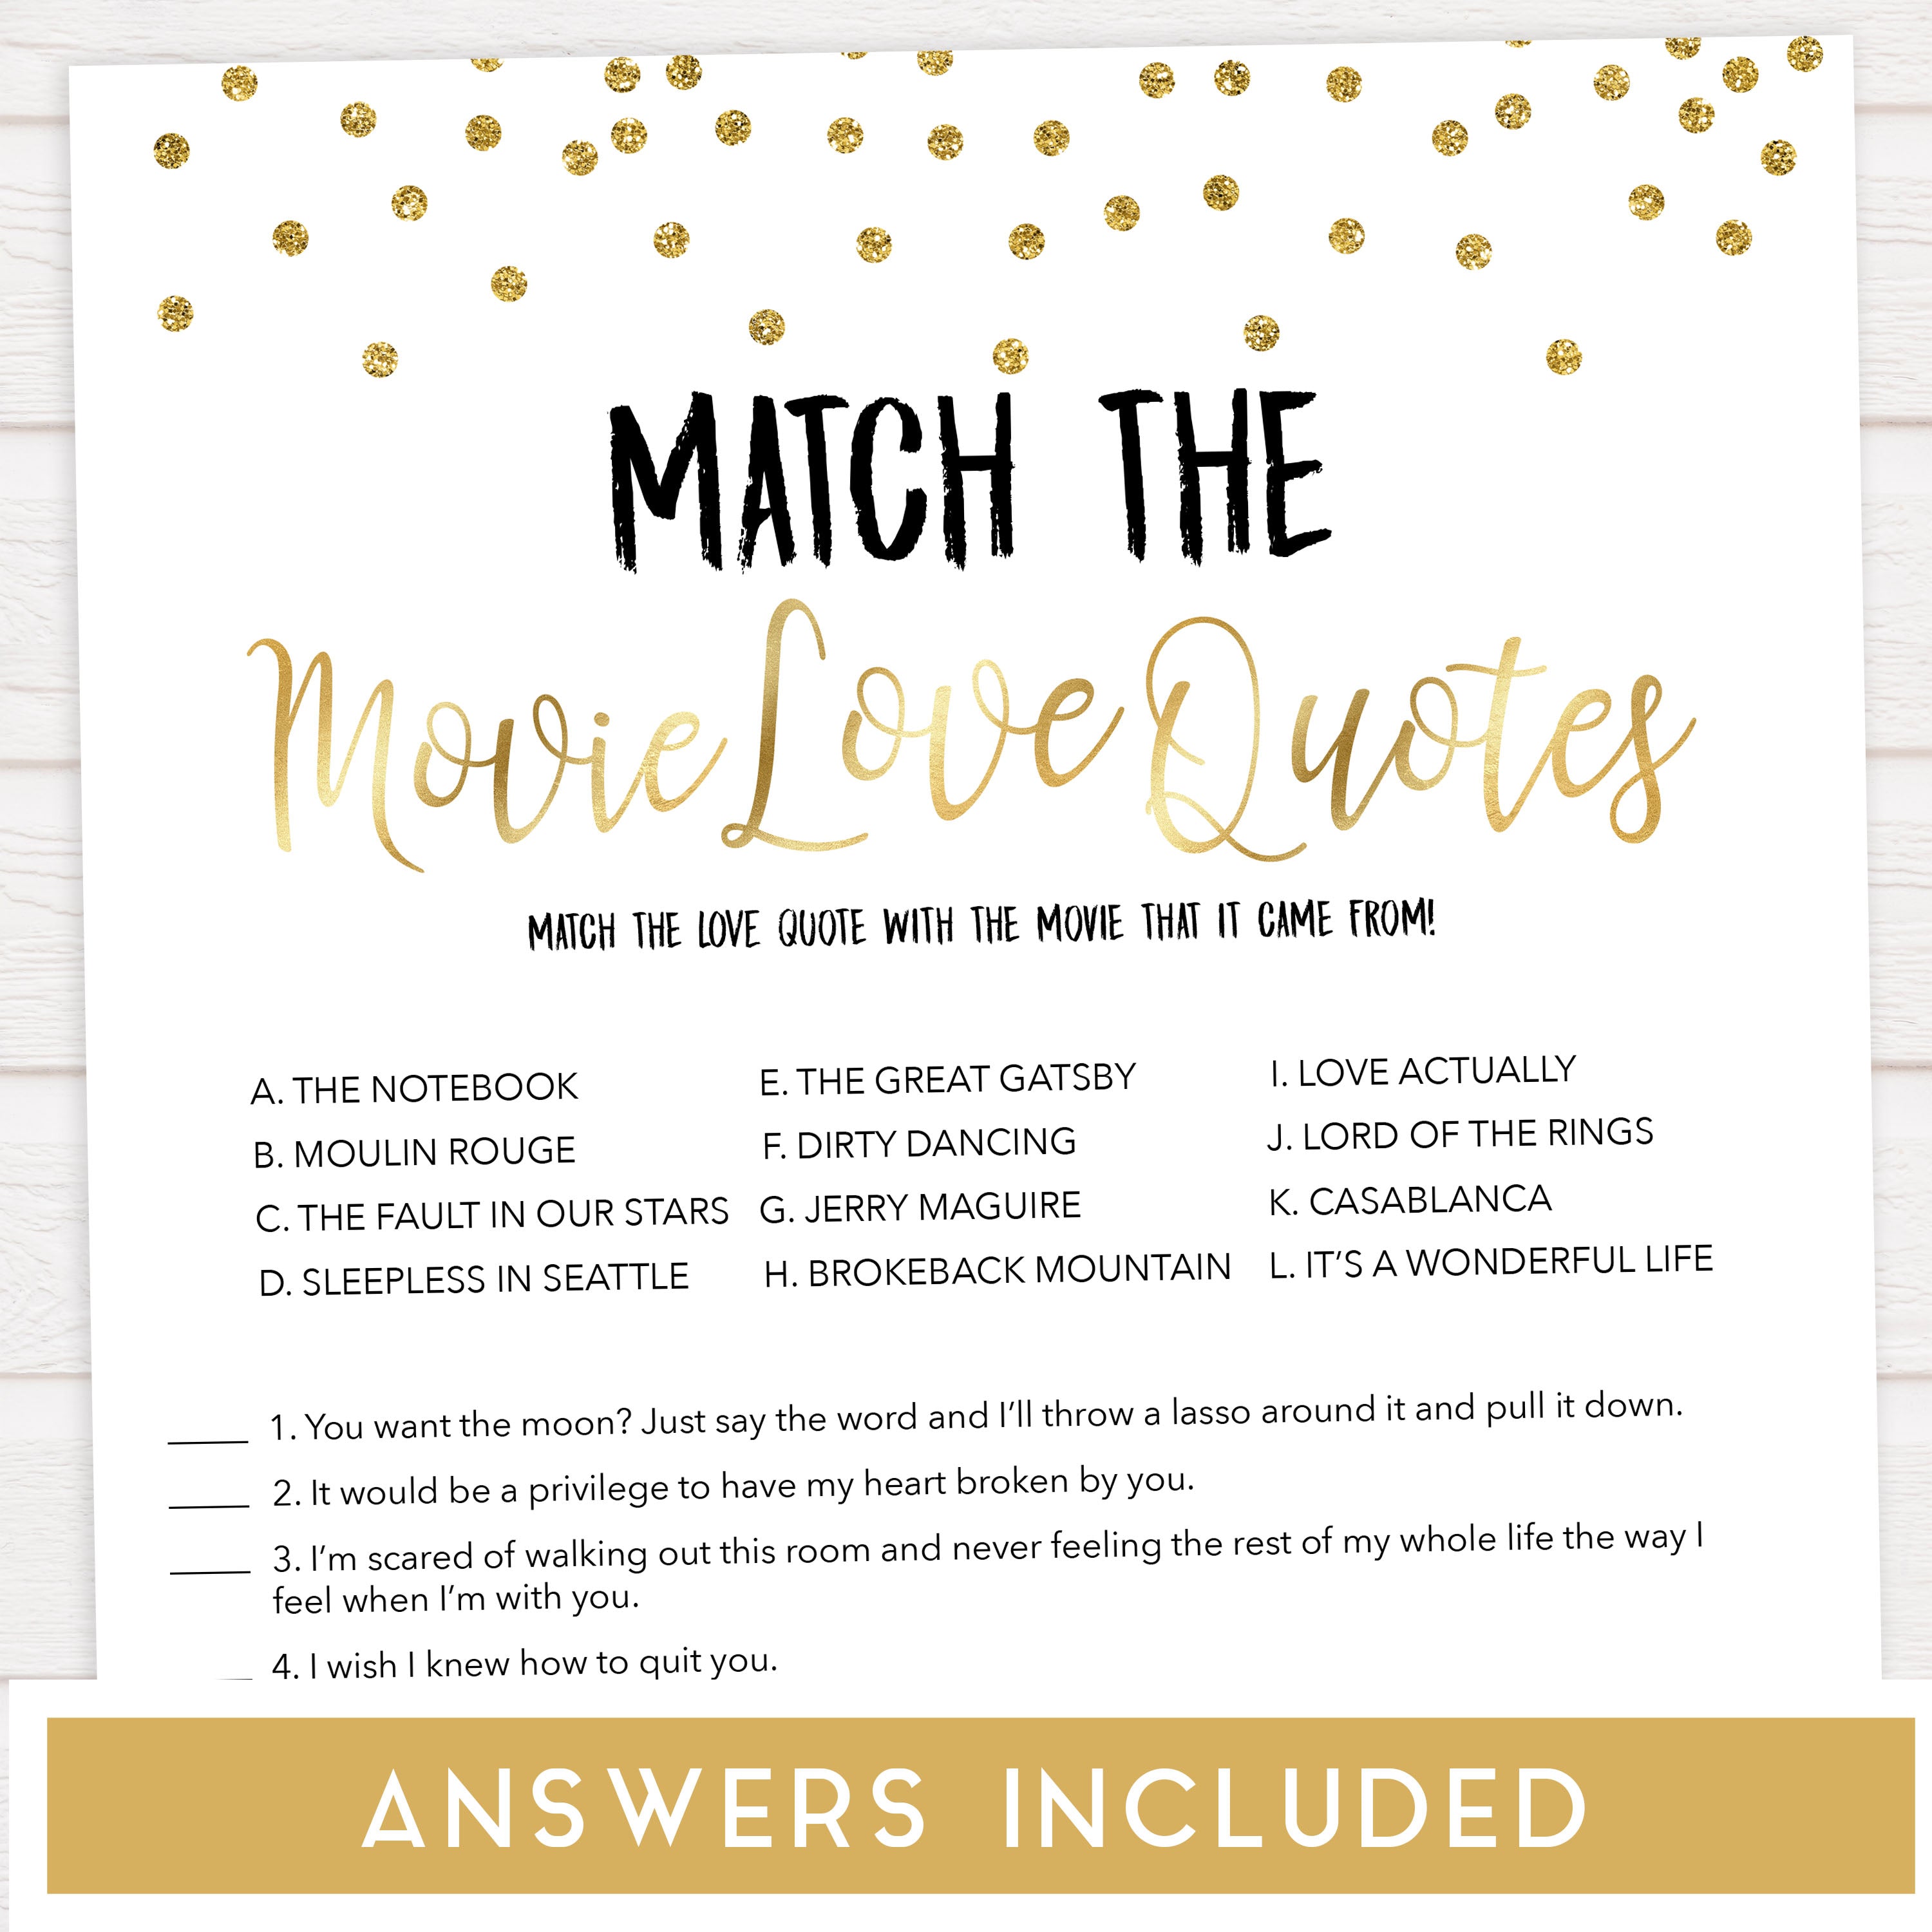 match the movie love quotes, bridal movie love quotes games, Printable bridal shower games, gold glitter bridal shower, gold glitter bridal shower games, fun bridal shower games, bridal shower game ideas, gold glitter bridal shower